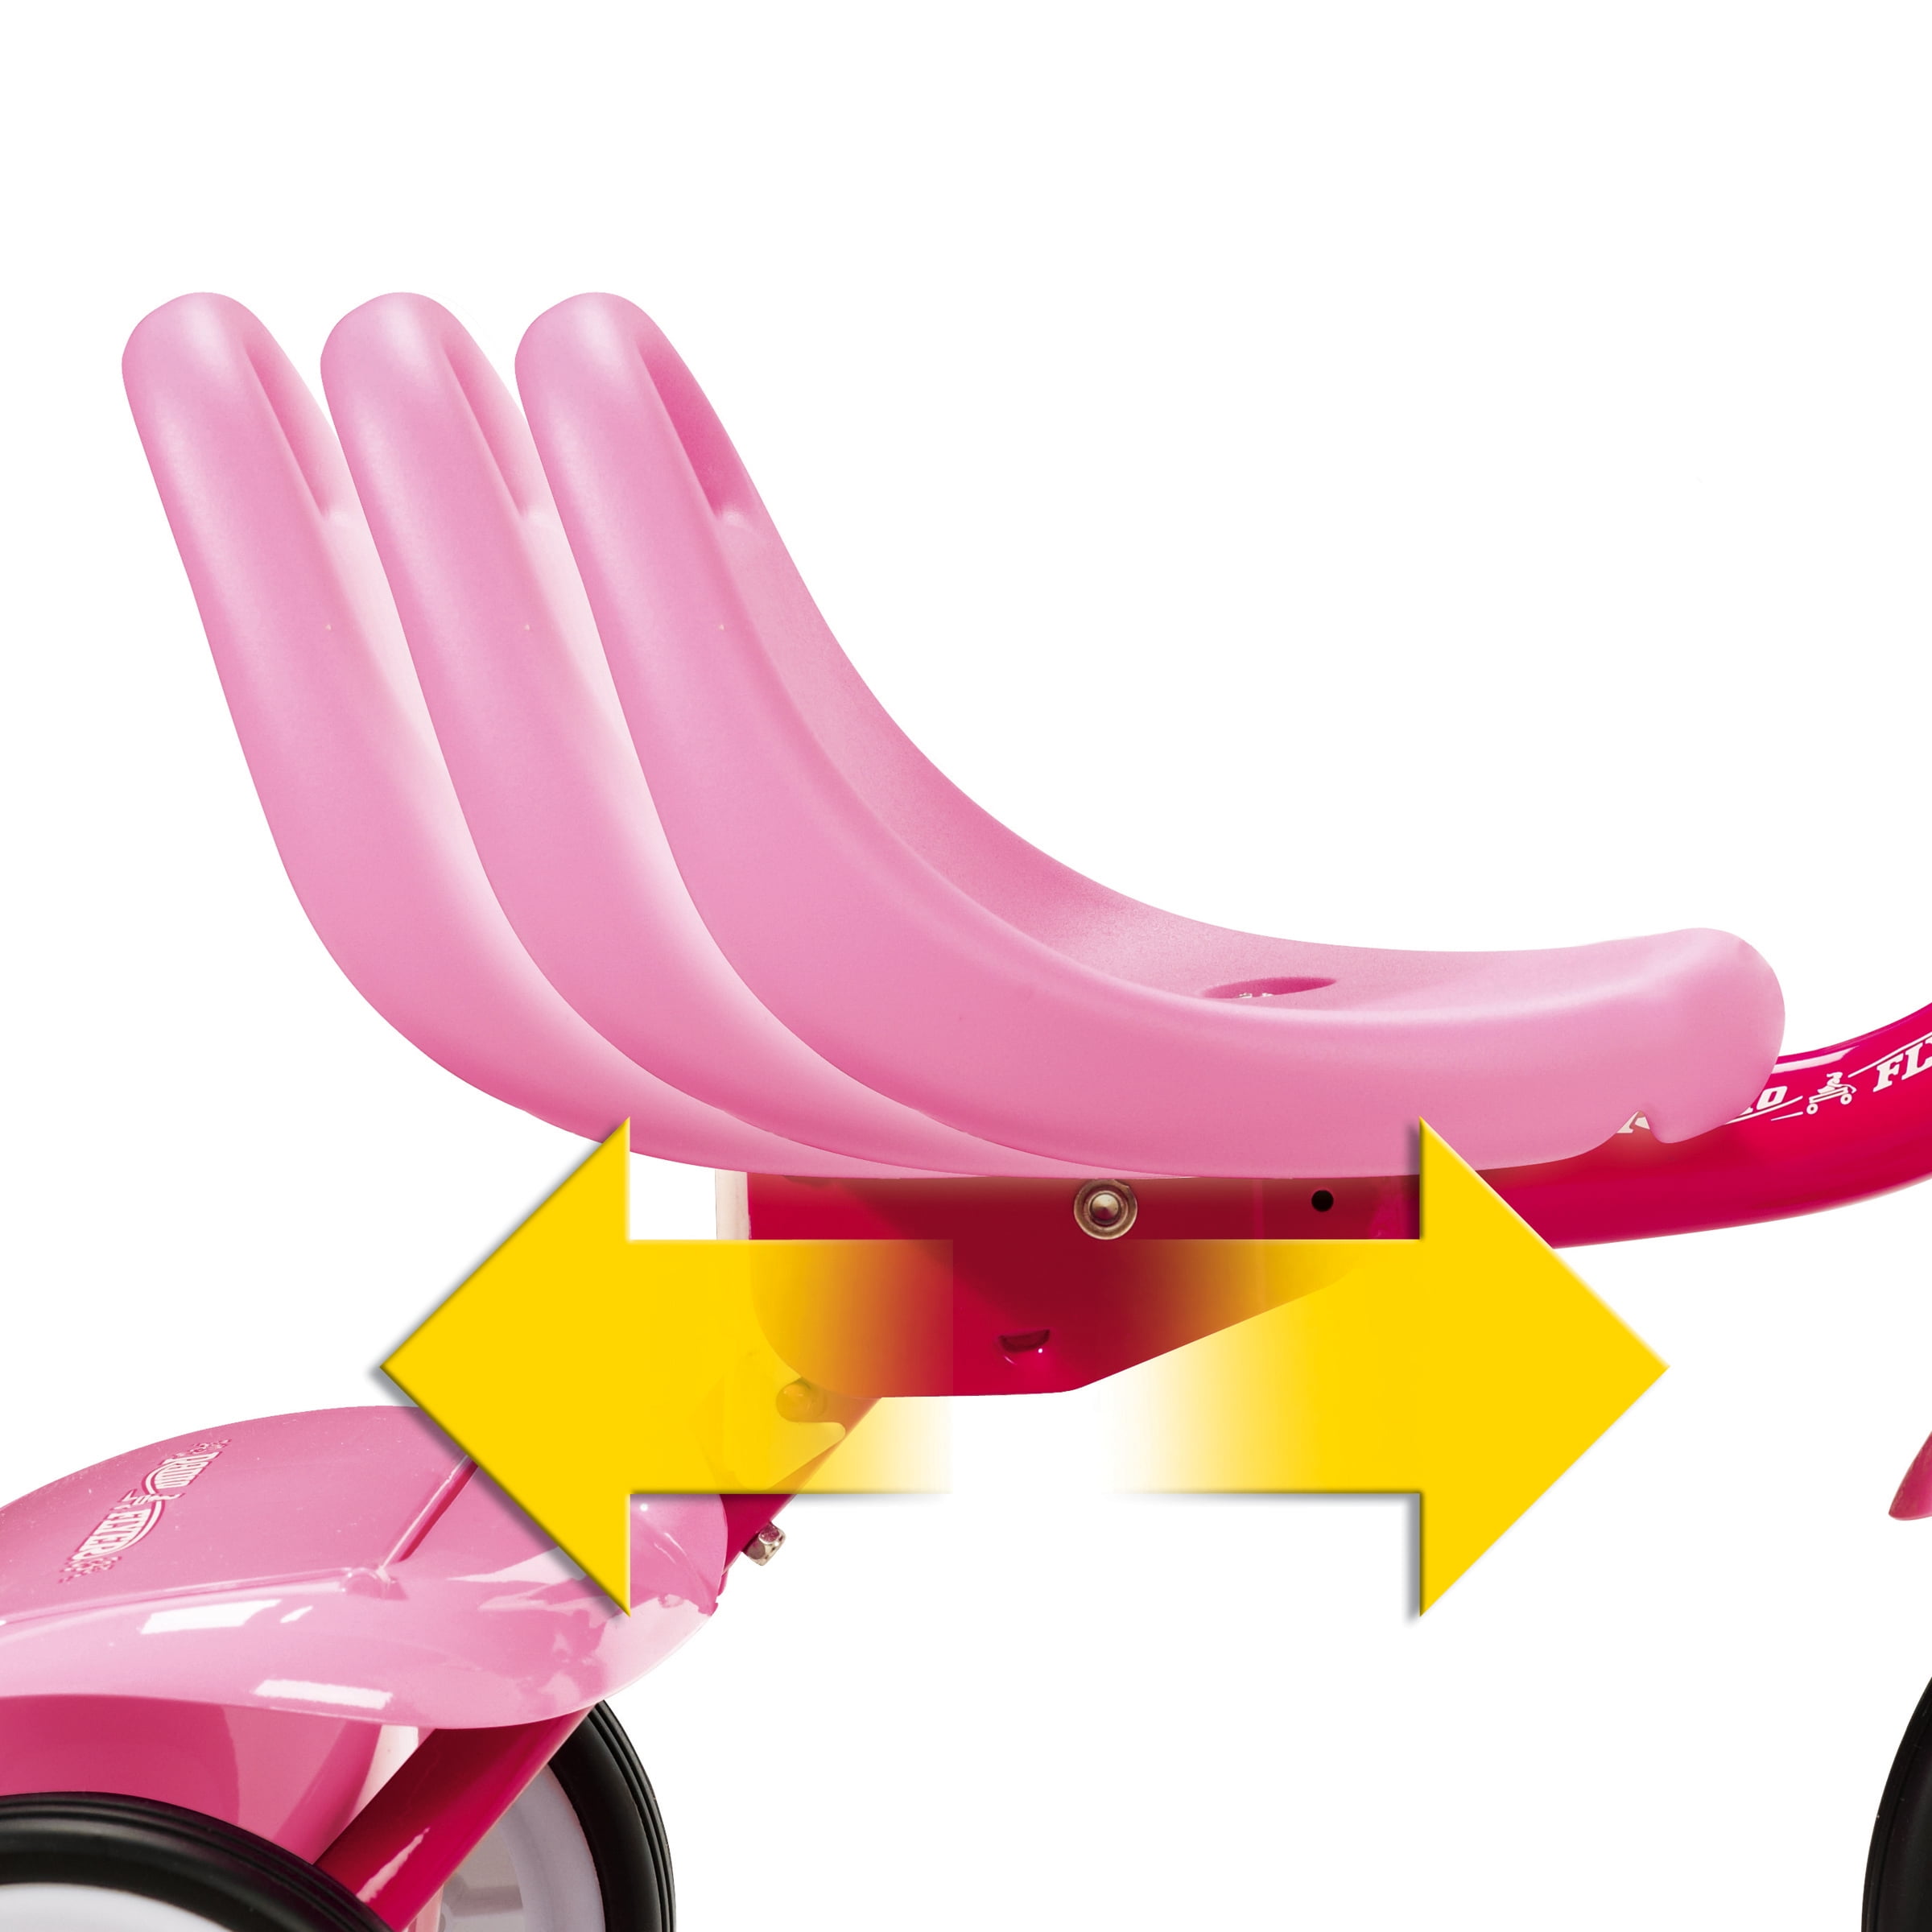 Radio Flyer, Ready to Ride Folding Trike, Fully Assembled, Pink, Beginner Tricycle for Kids - 2